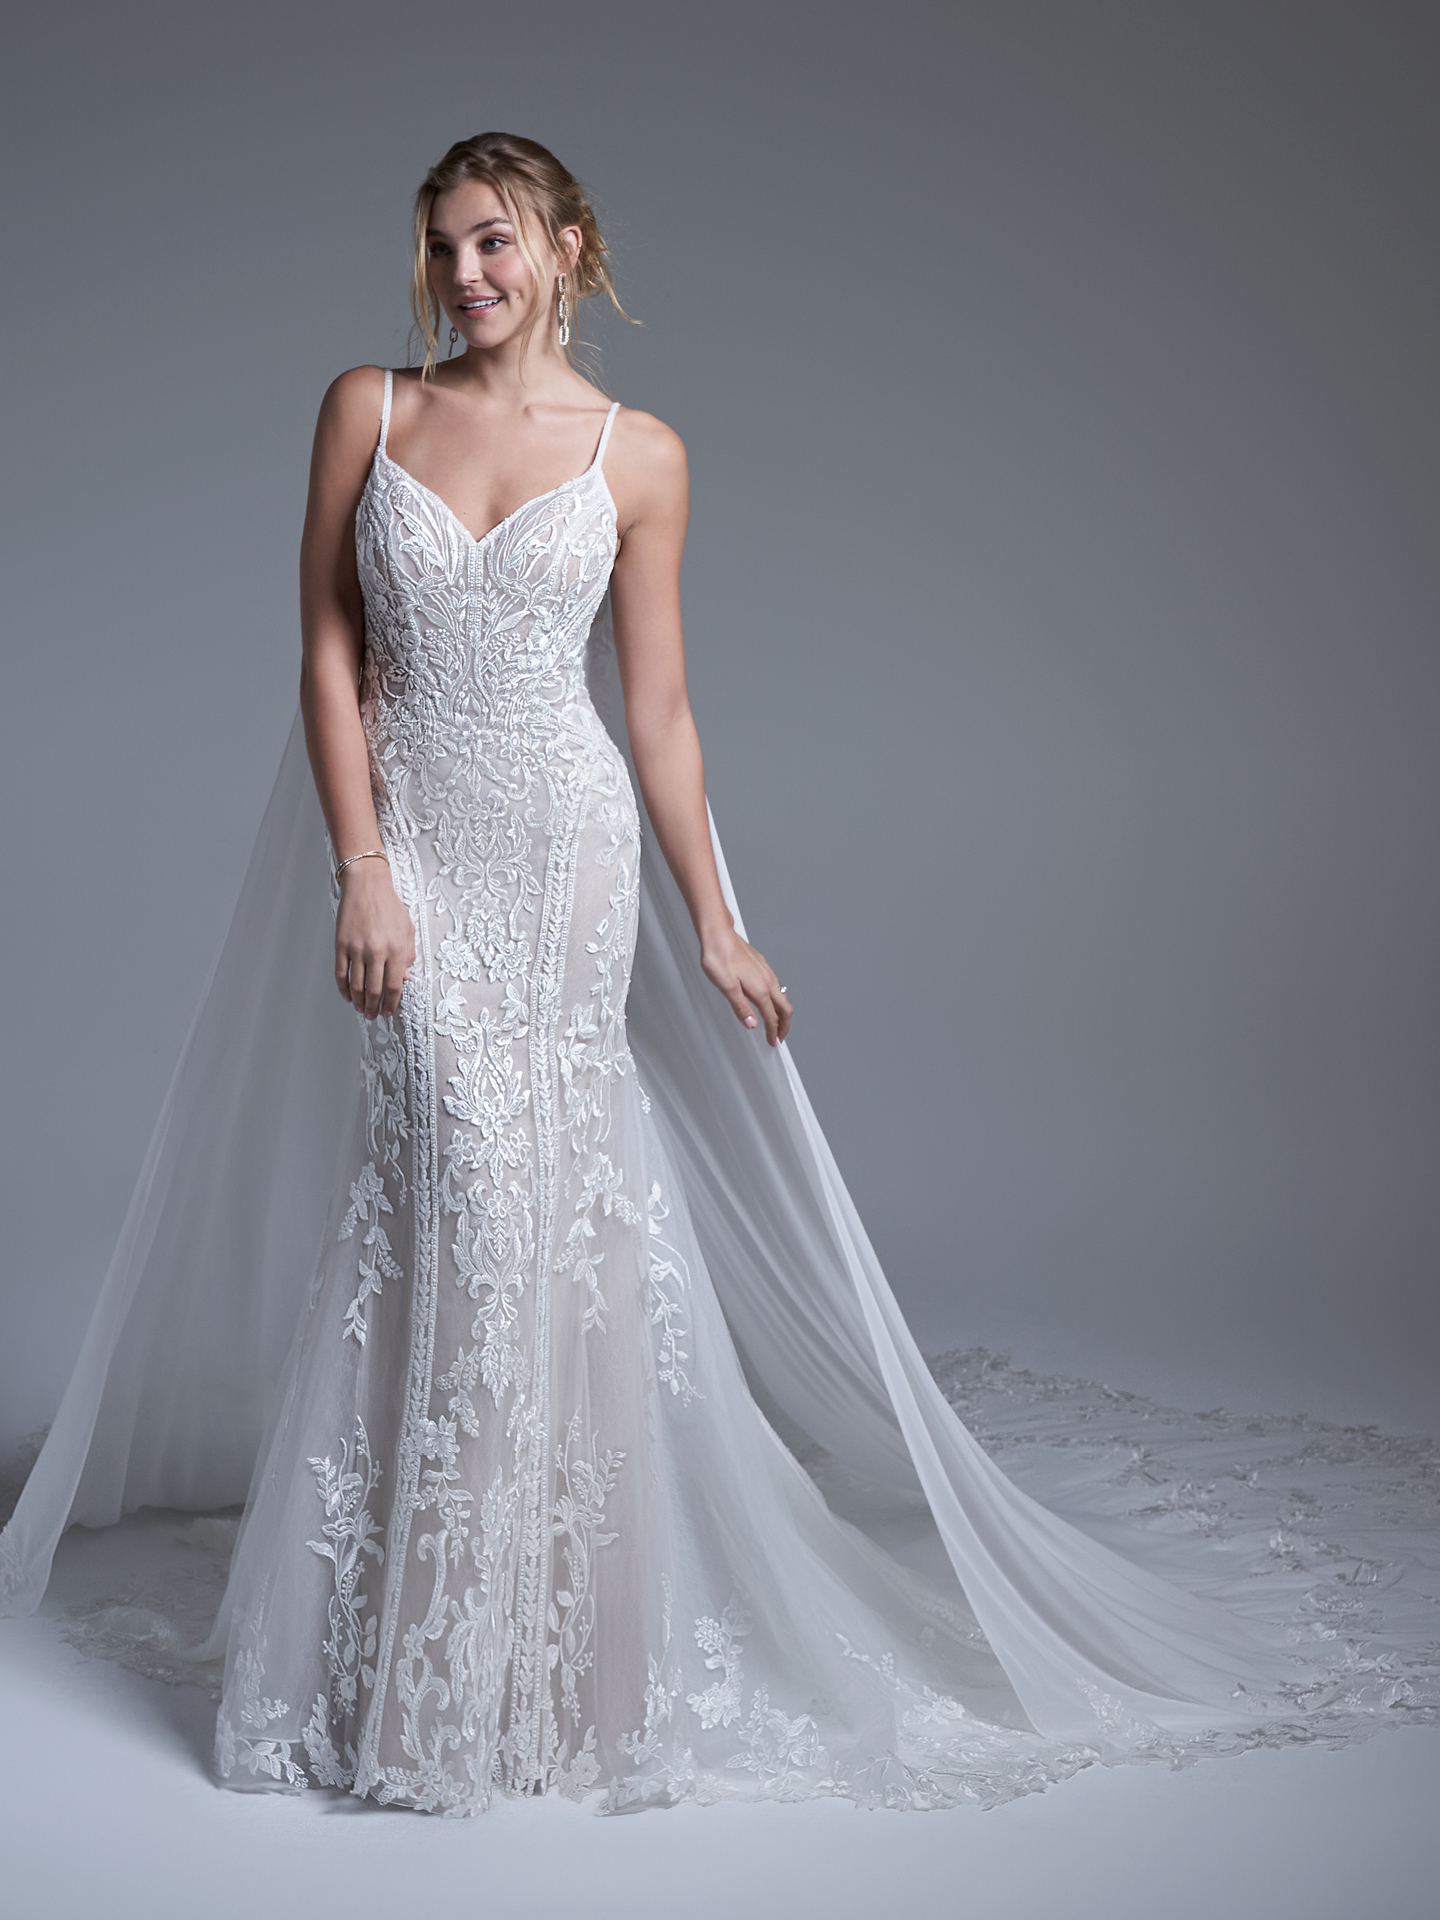 Bride In Lace Fit And Flare Wedding Dress With Bridal Cape Called Liam By Sottero And Midgley